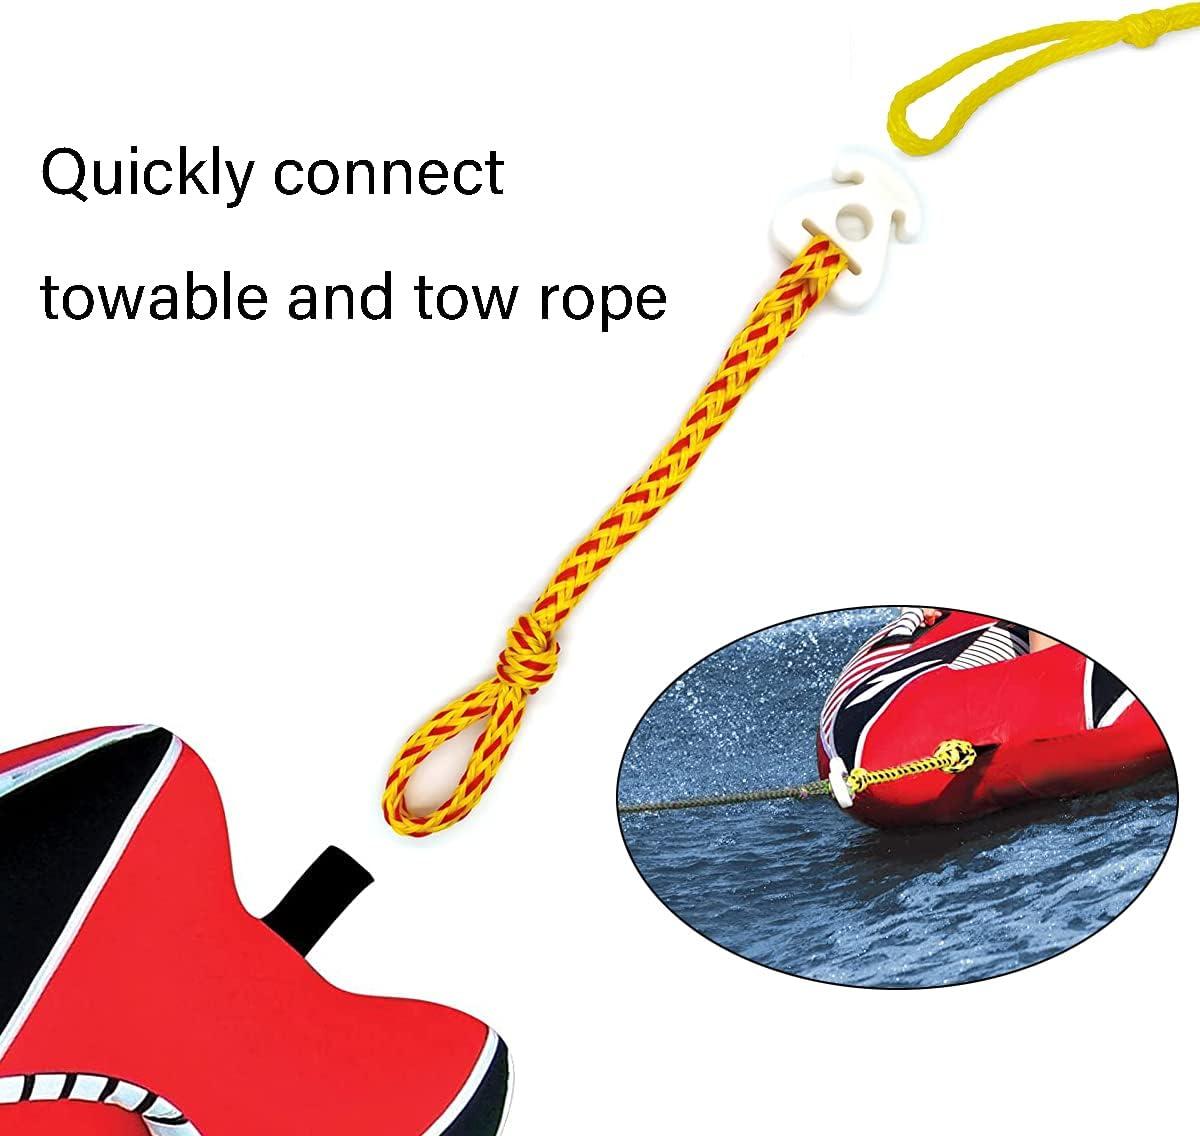 Towable Tube Tow Rope Connector Harness Water Ski Rope Wake Board Line  Connection Water Sports Accessories Lake Boat for Tubing yellow&red